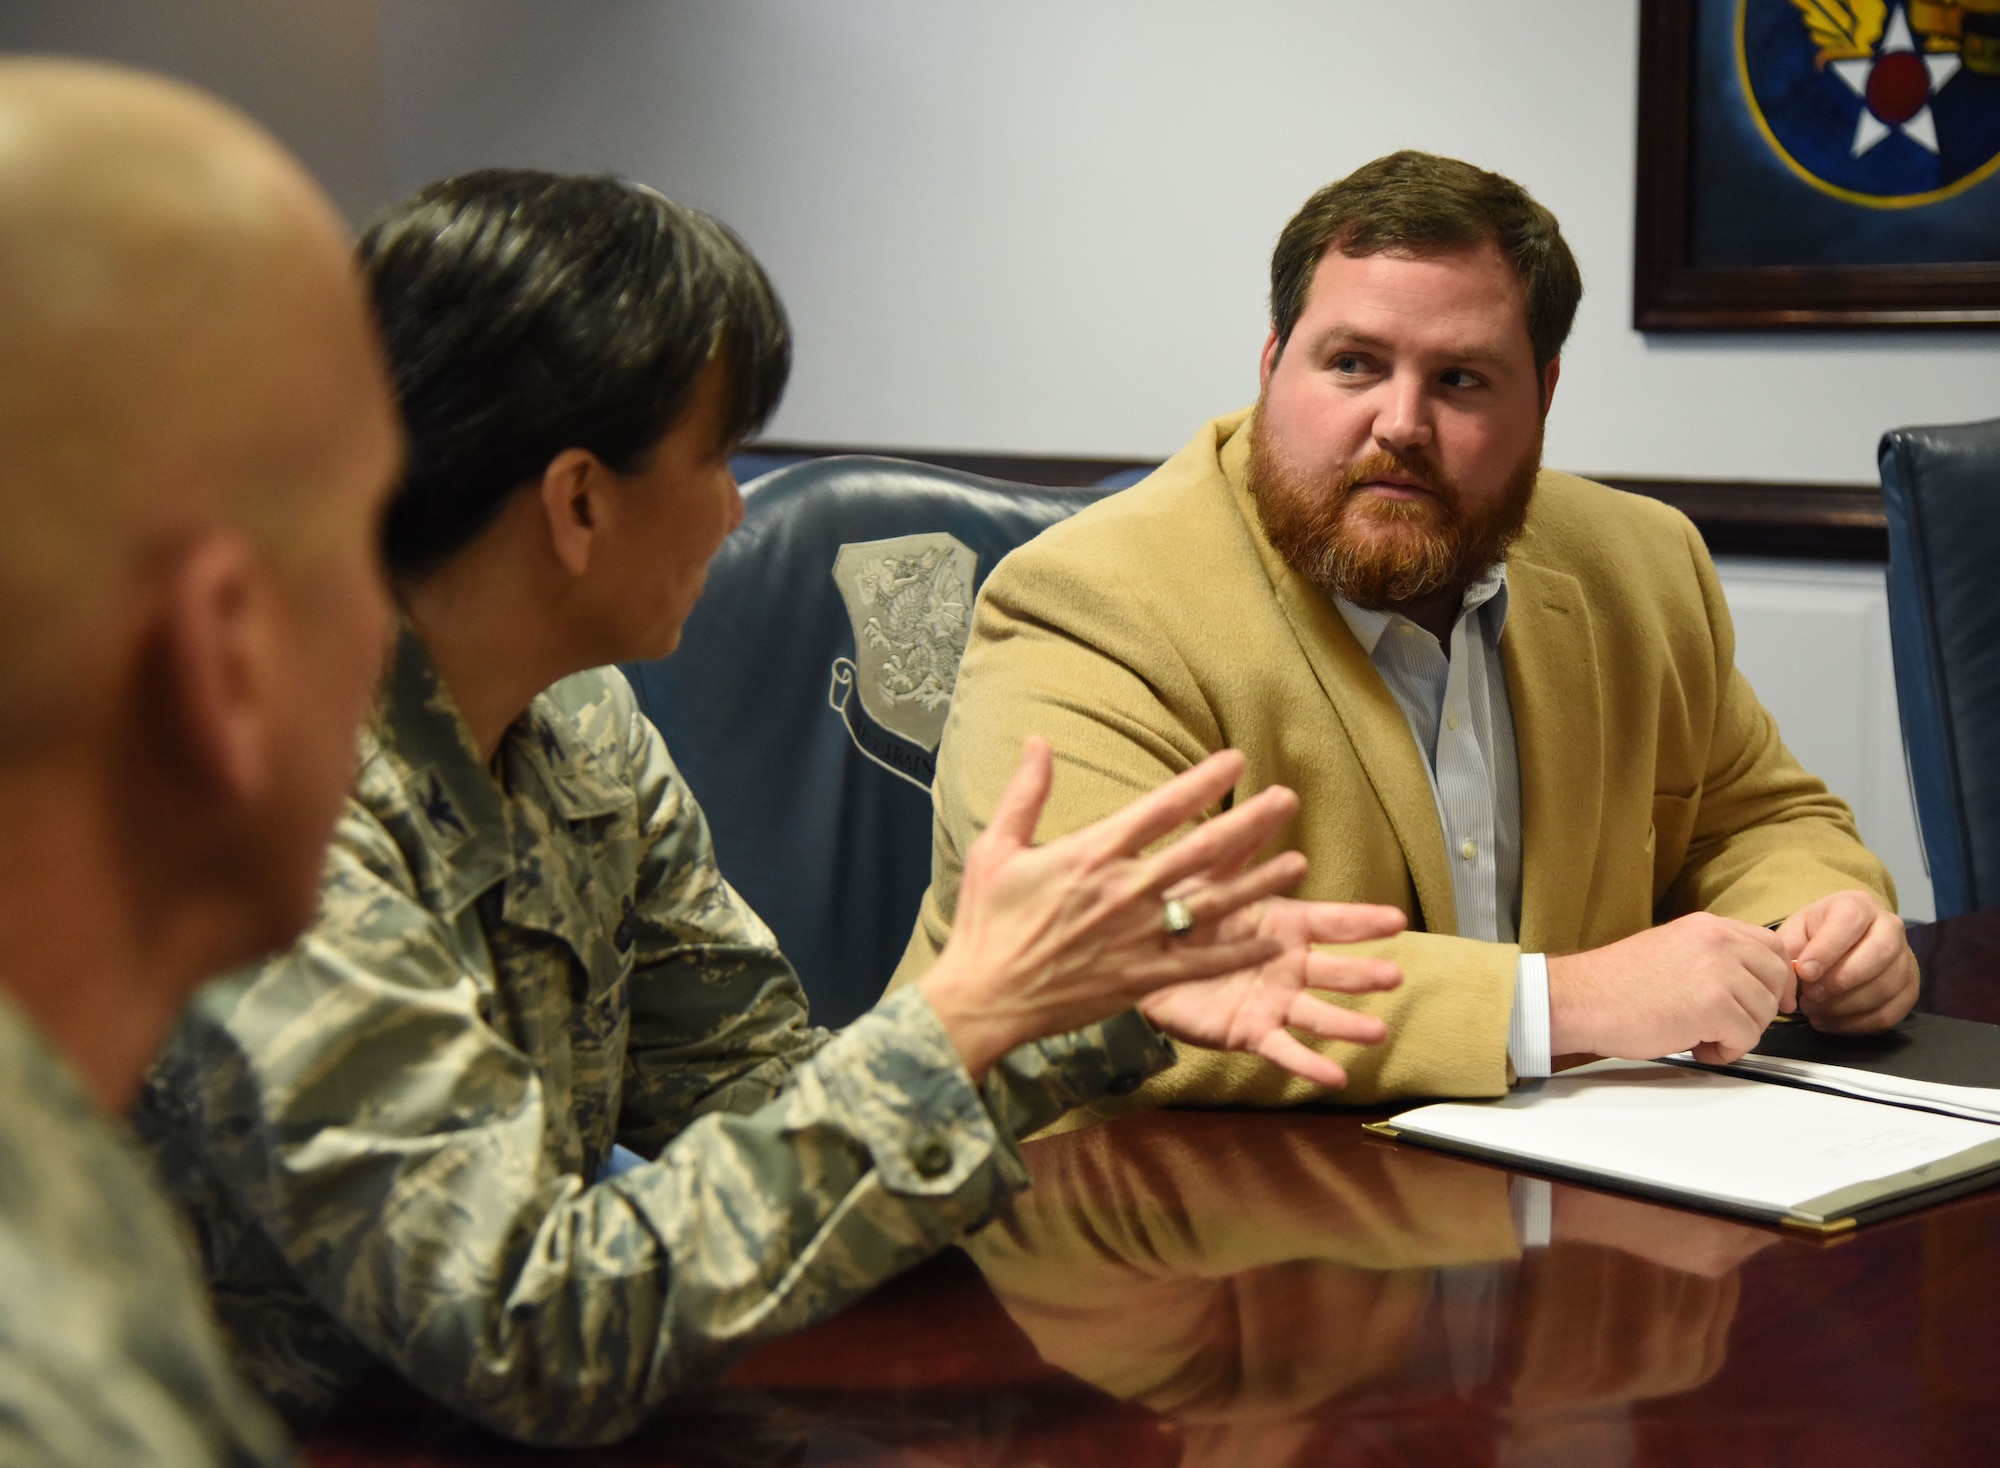 Col. Debra Lovette, 81st Training Wing commander, briefs David Allen, legislative assistant for Congressman Steven Palazzo, on Keesler training capabilities during an 81st Training Wing mission brief at the headquarters building Jan. 26, 2018, on Keesler Air Force Base, Mississippi. Allen visited Keesler to learn more about the base and on-going construction projects that impact the local community, like the Division Street Gate which will begin construction this summer. (U.S. Air Force photo by Kemberly Groue)